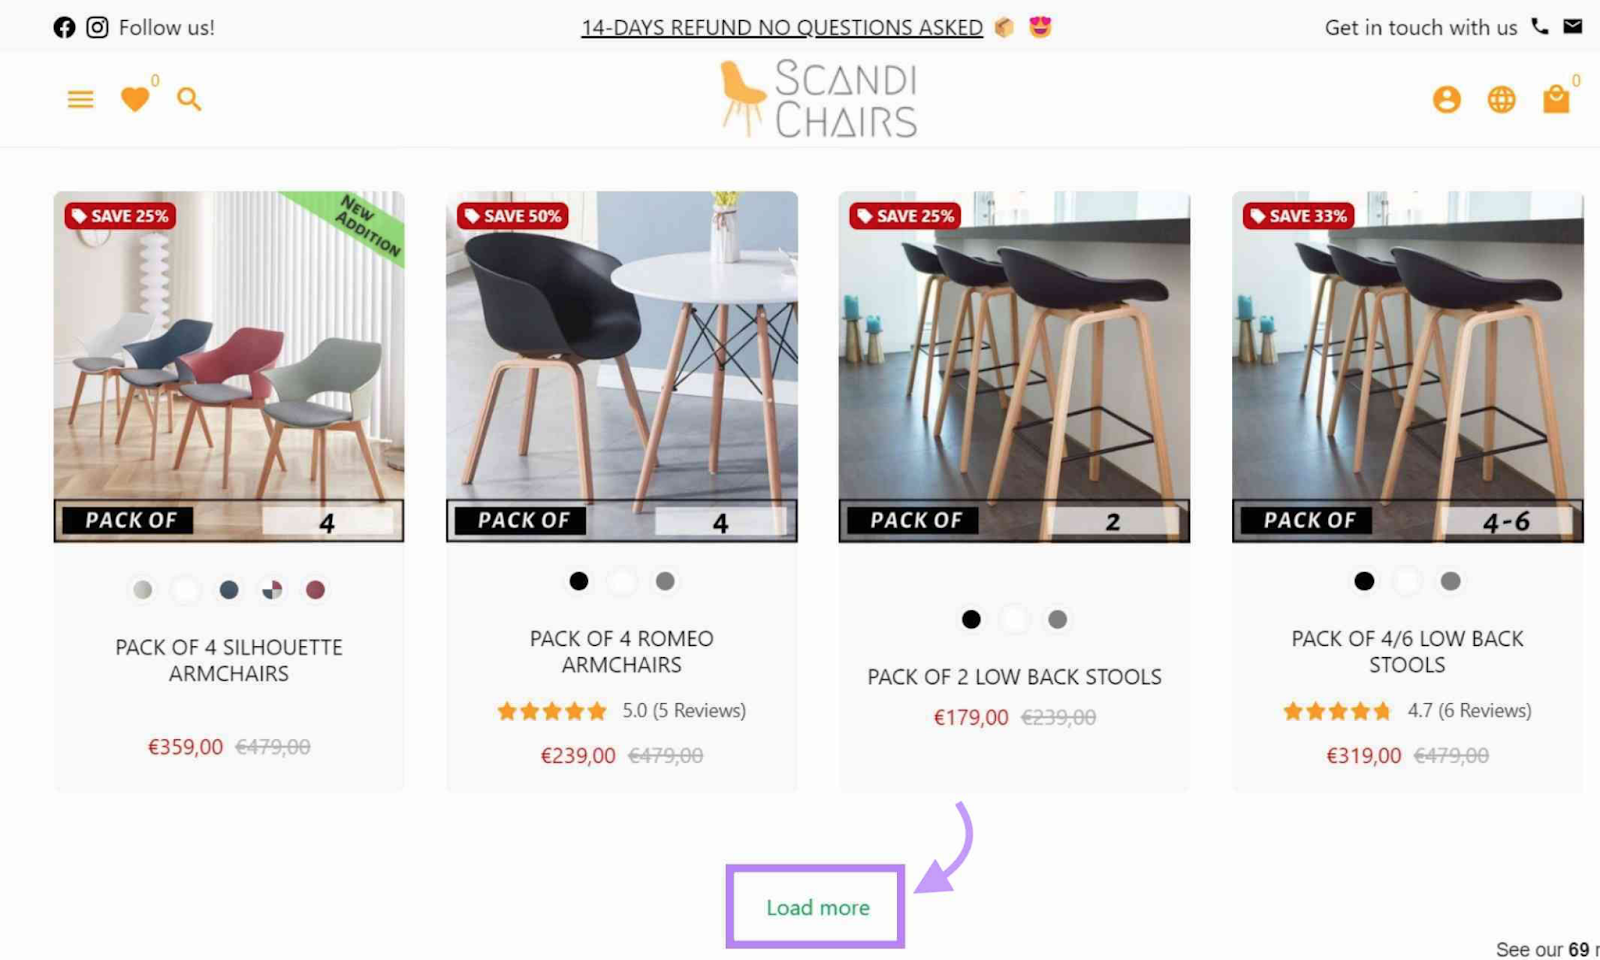 “Load more” button highlighted on the Scandi Chairs page